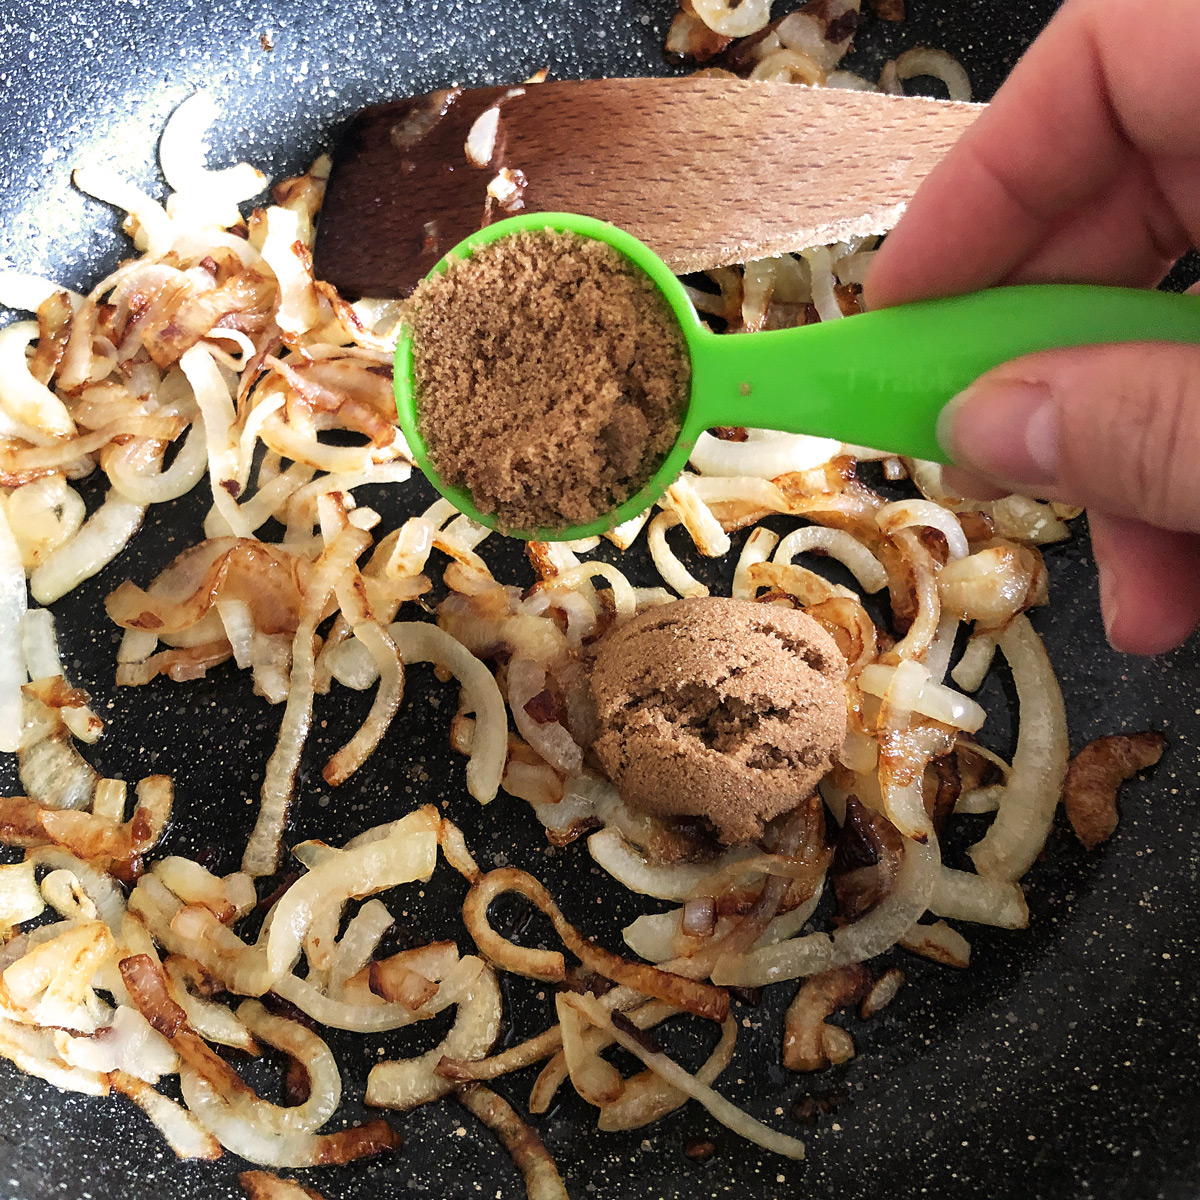 Adding two tablespoons of muscovado sugar into caramelised onion.